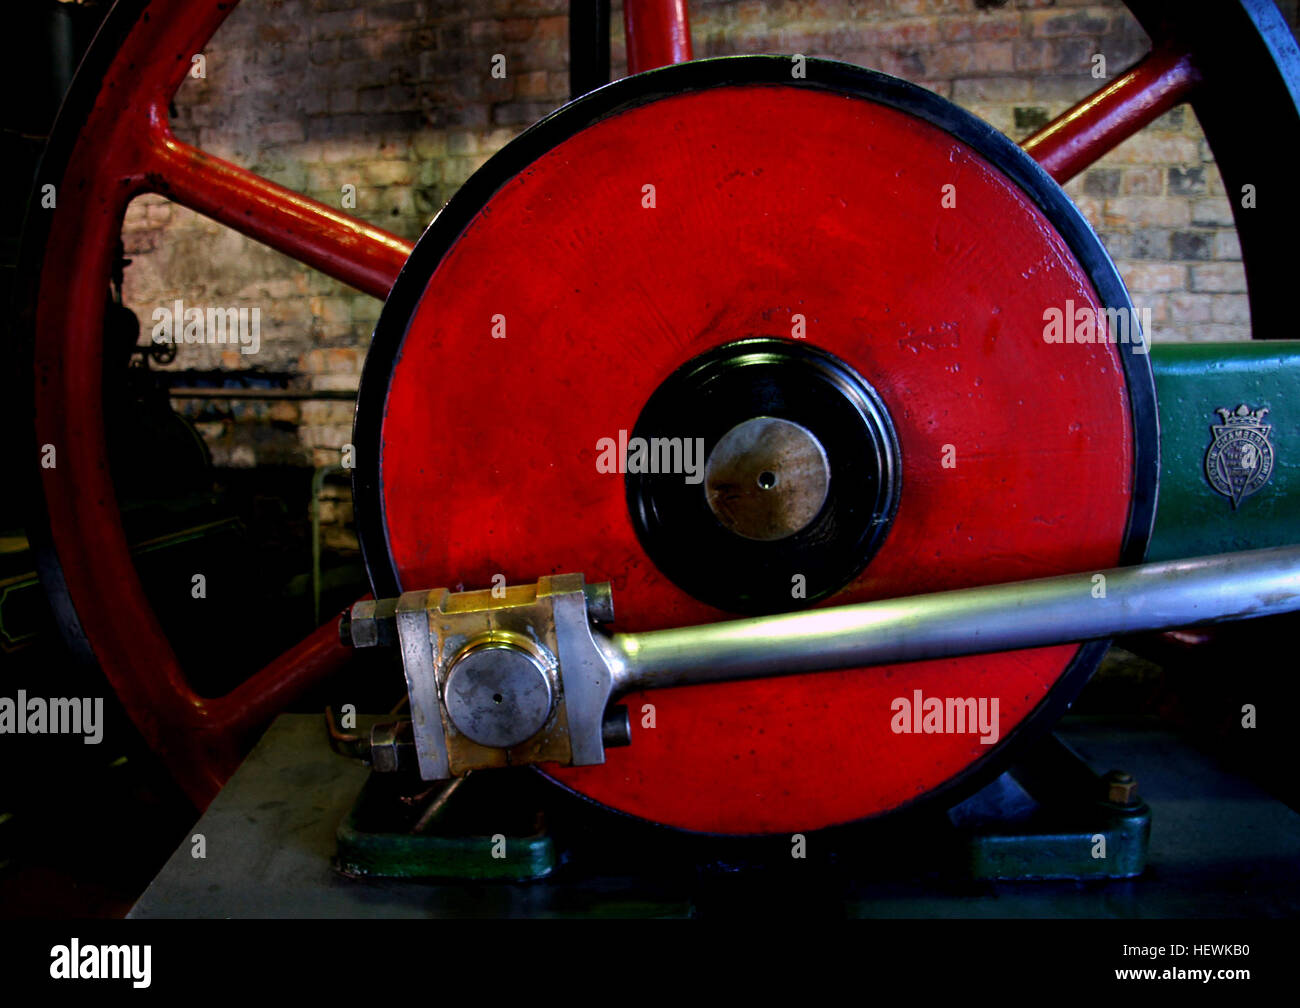 A steam engine is a heat engine that performs mechanical work using steam as its working fluid.  Using boiling water to produce mechanical motion goes back over 2000 years, but early devices were not practical. The Spanish inventor Jerónimo de Ayanz y Beaumont patented in 1606 the first steam engine. In 1698 Thomas Savery patented a steam pump that used steam in direct contact with the water being pumped. Savery's steam pump used condensing steam to create a vacuum and draw water into a chamber, and then applied pressurized steam to further pump the water. The first commercial true steam engin Stock Photo